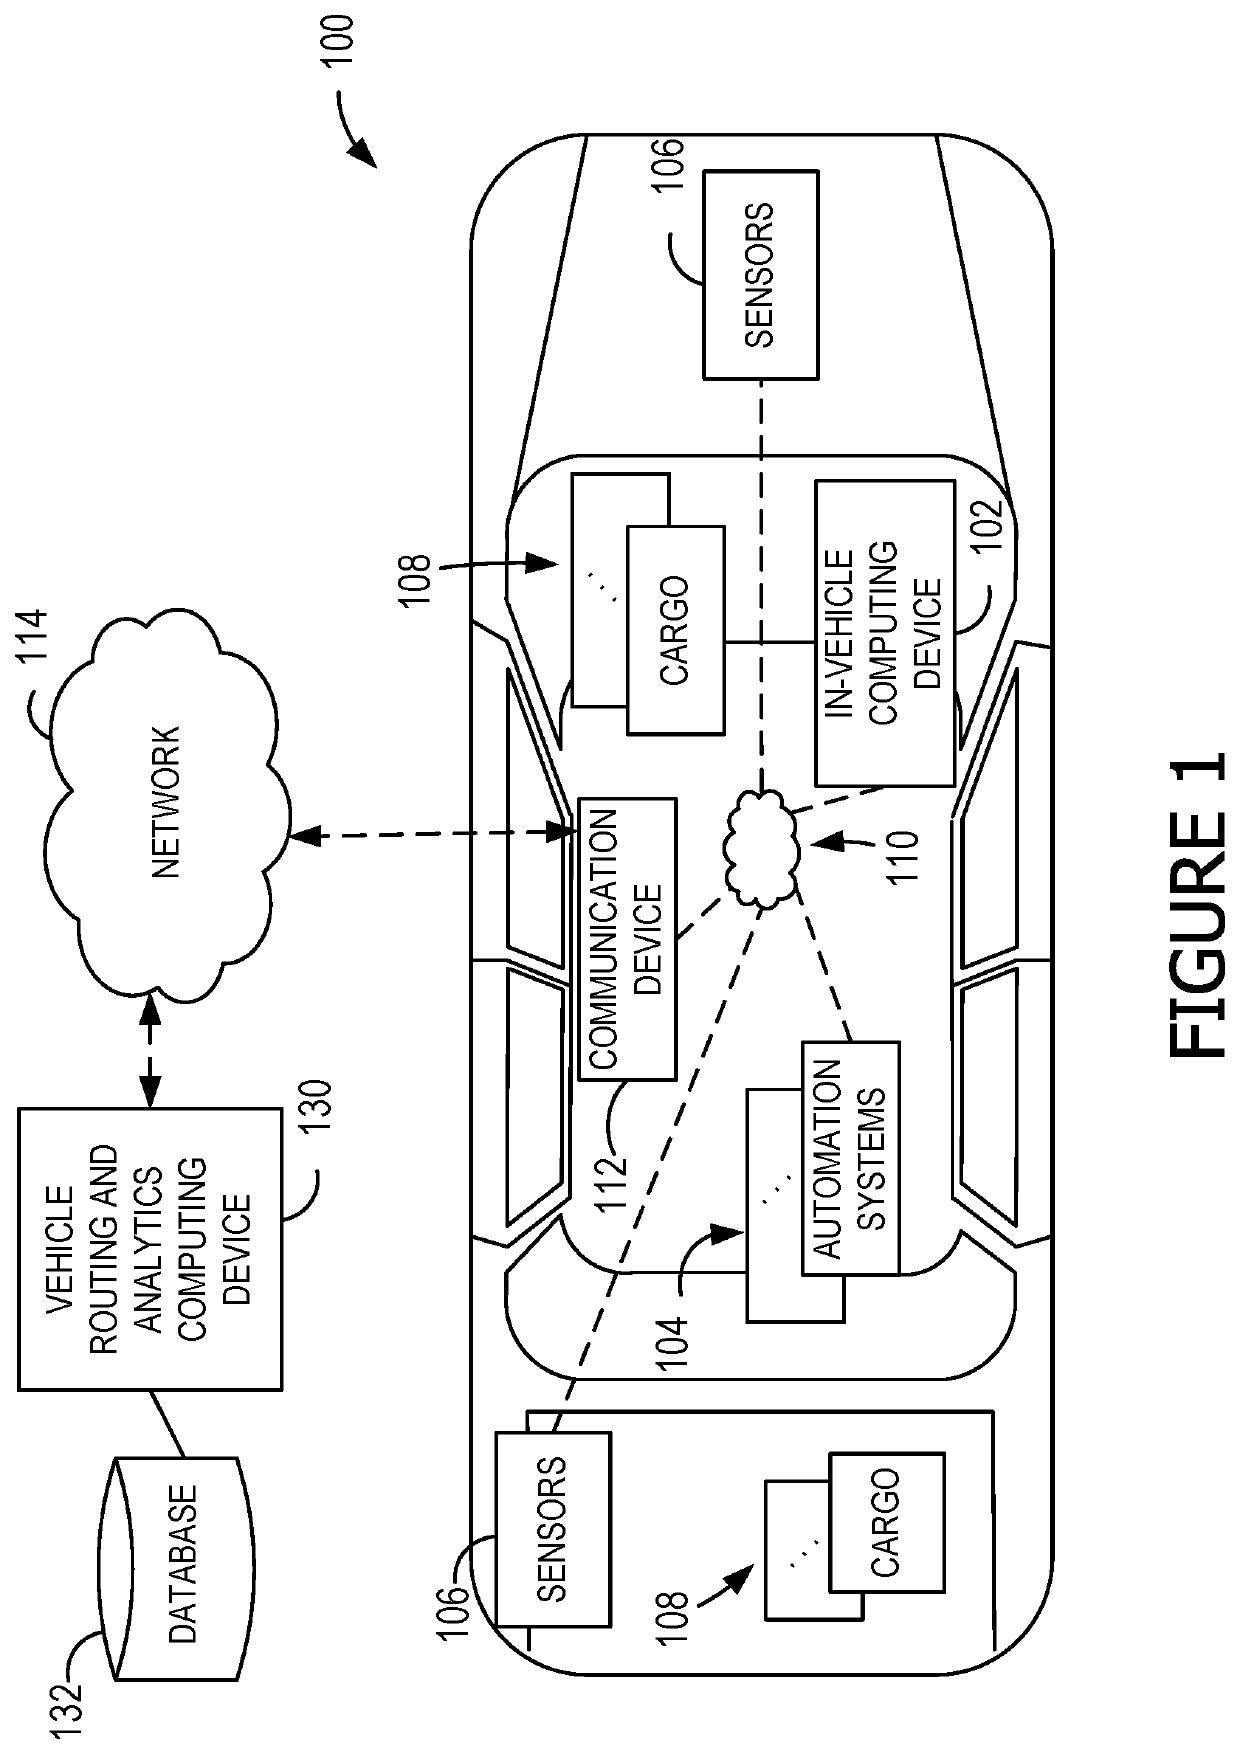 Systems and methods for dynamically generating optimal routes for vehicle delivery management